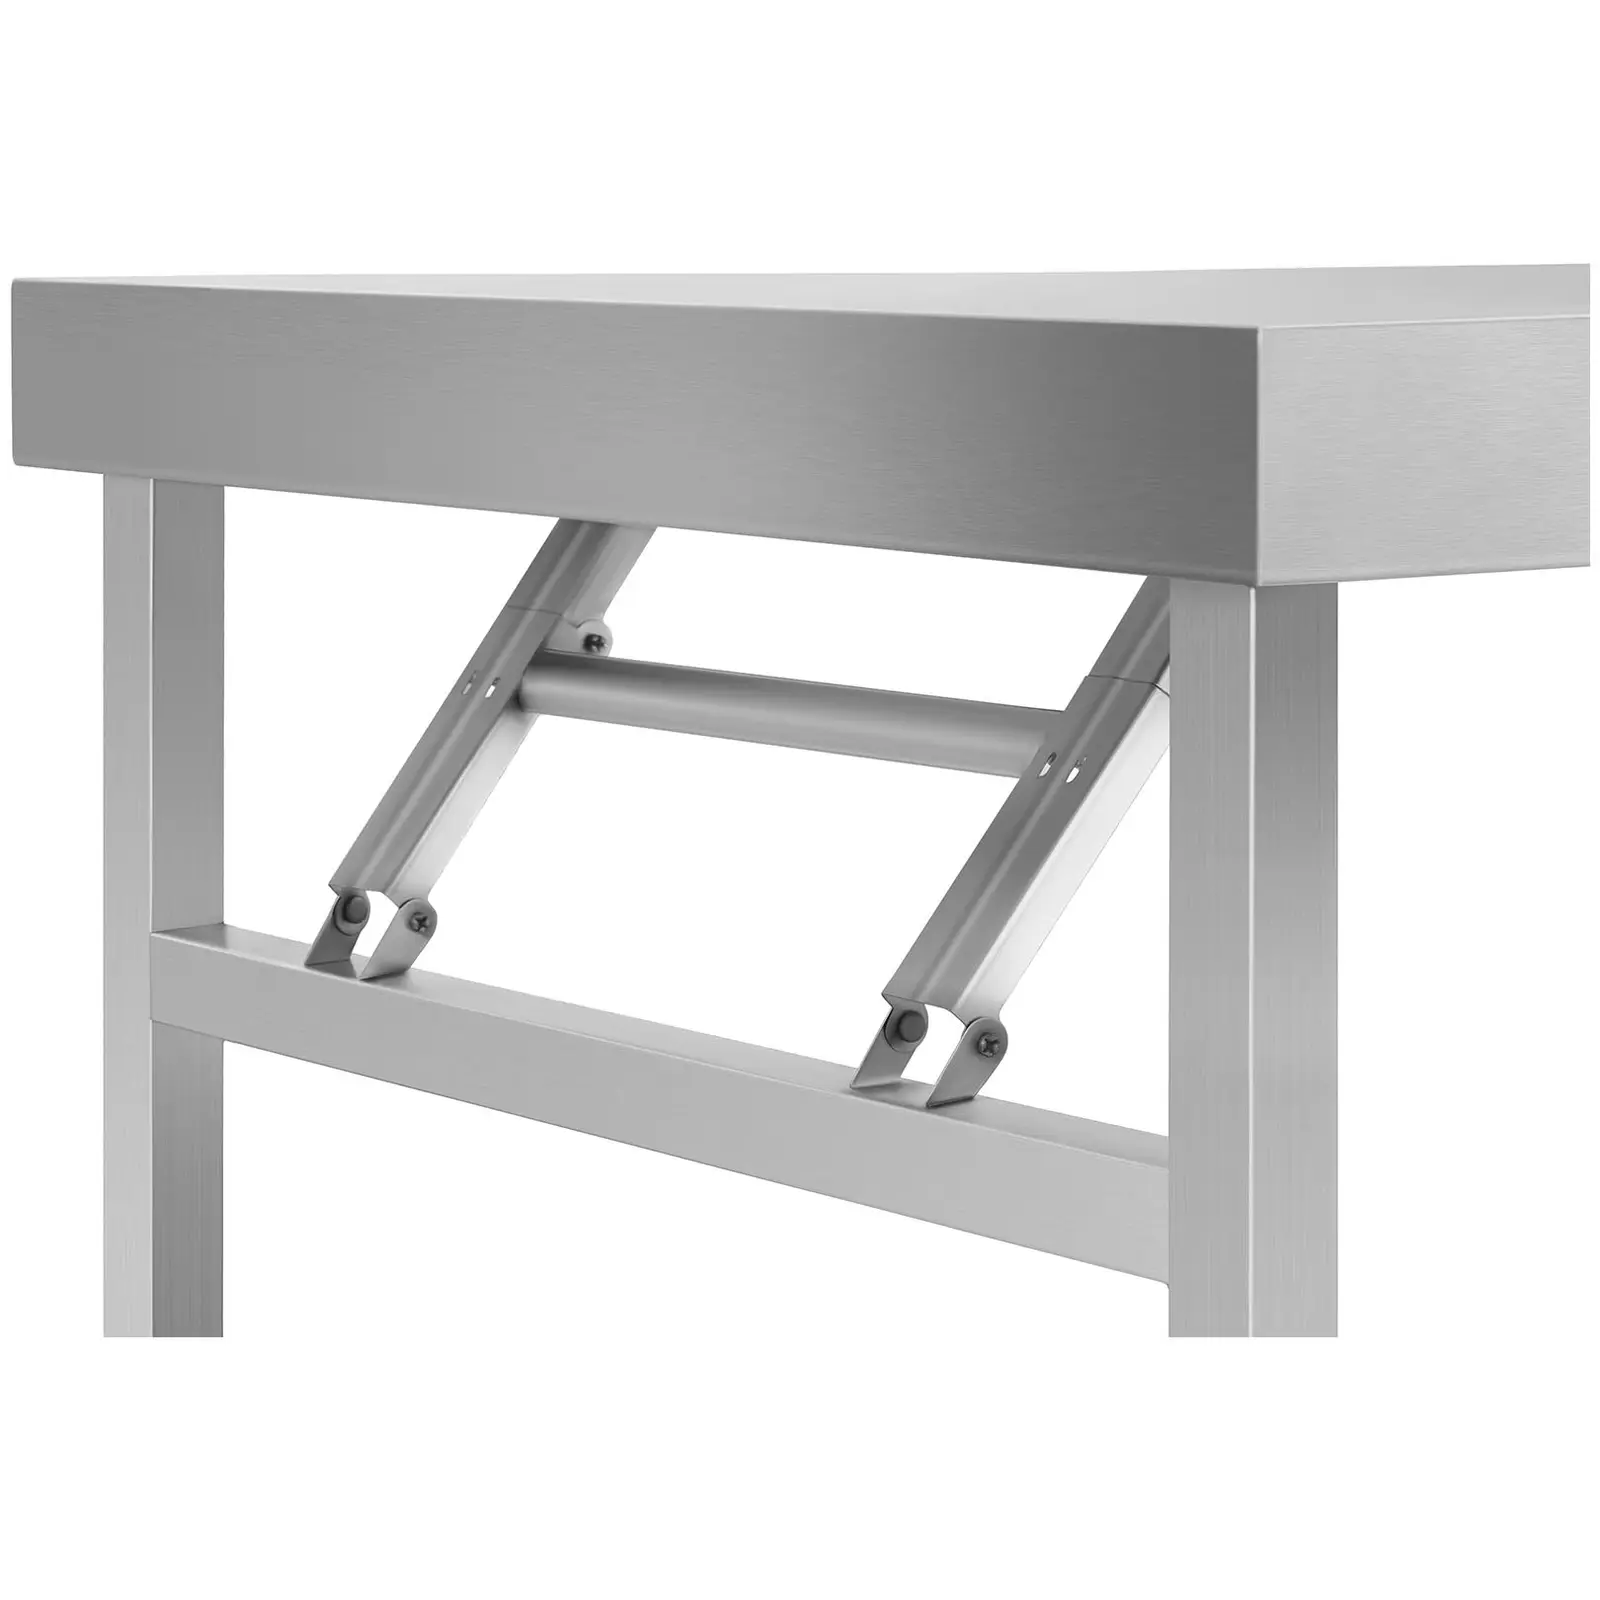 Folding Work Table - Stainless Steel - 120 x 60 cm